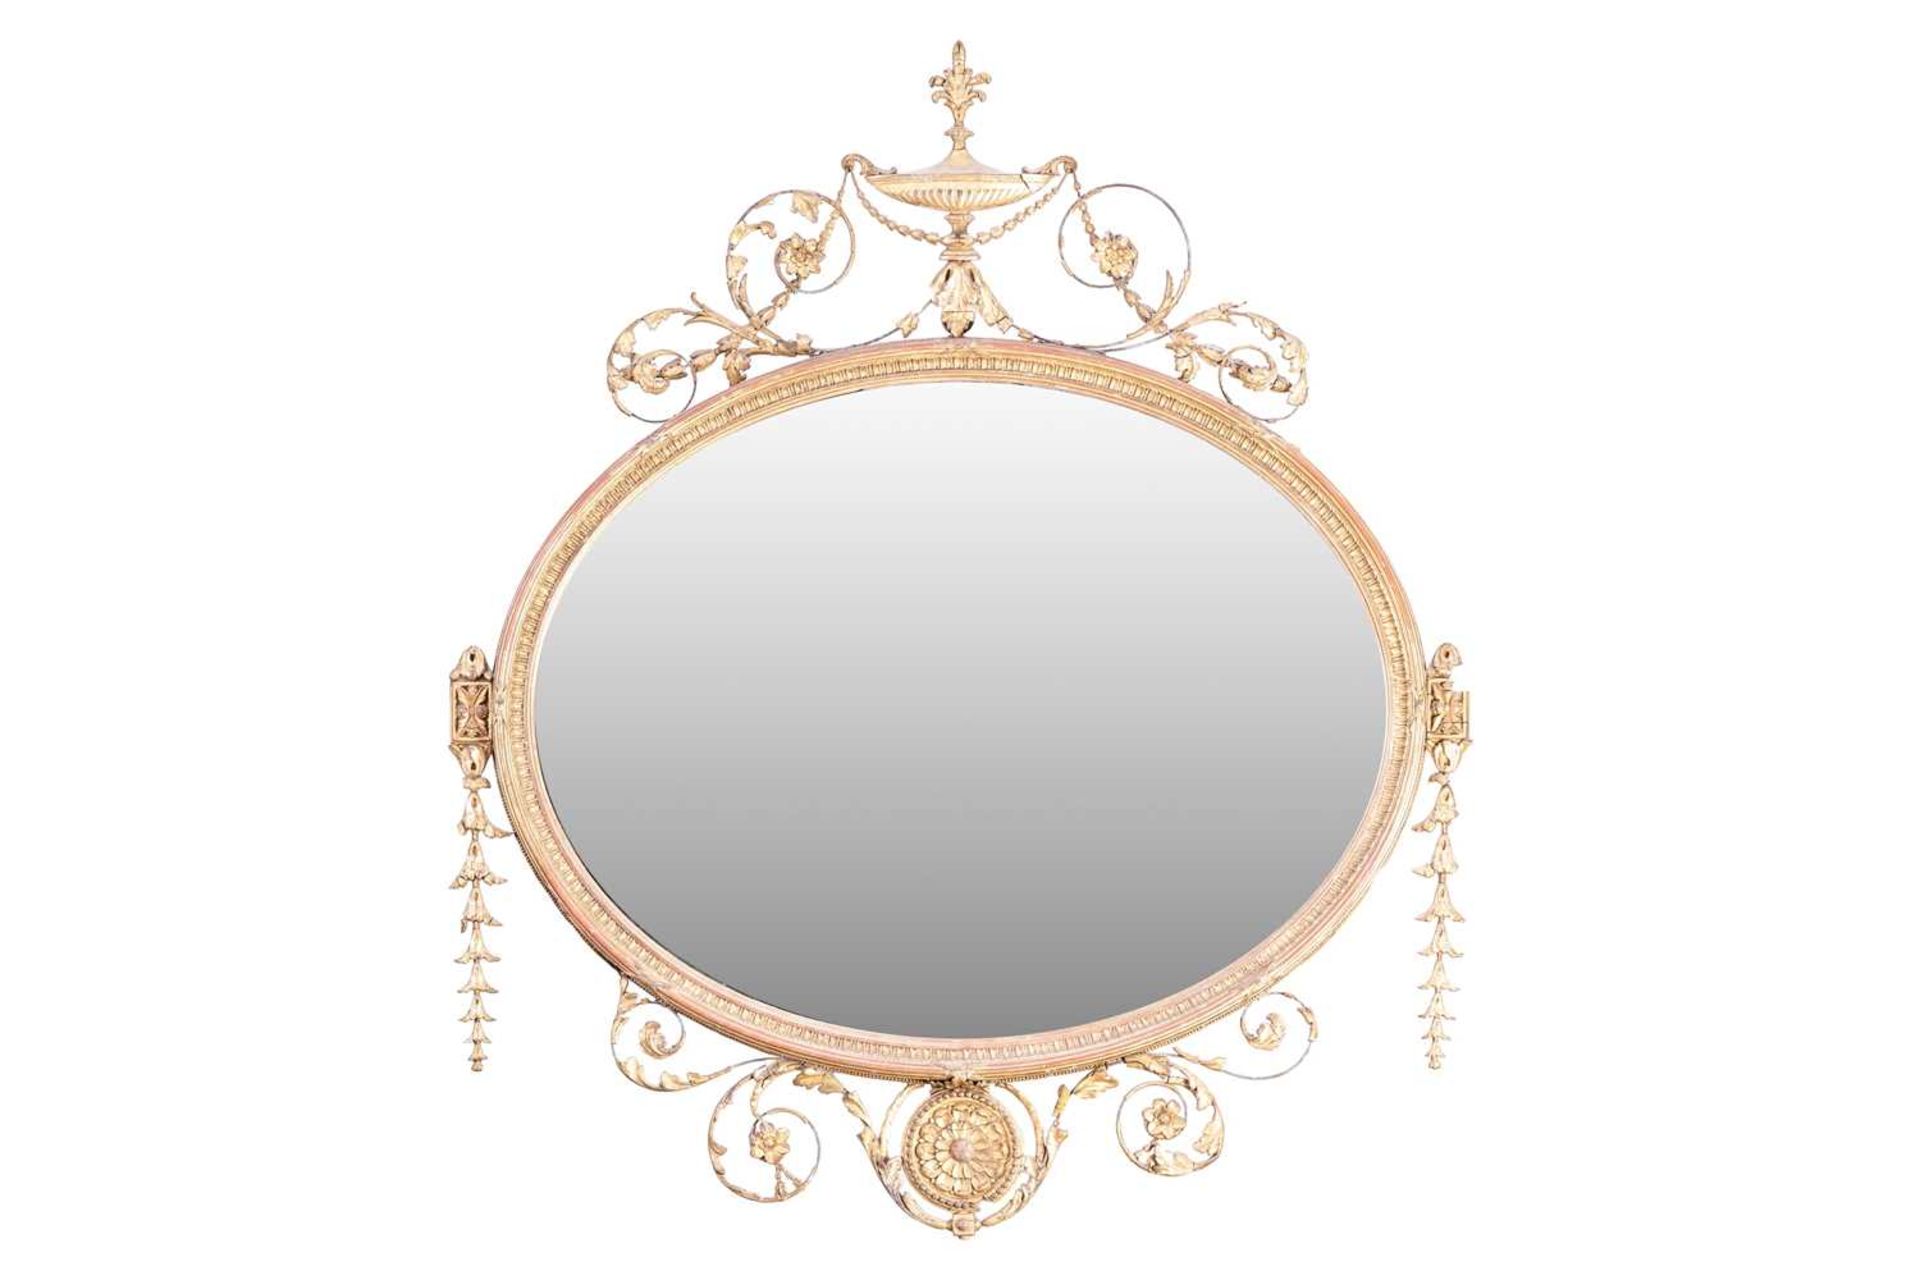 An Edwardian carved and gilt gesso oval overmantel mirror with urn surmount and swag decoration. 109